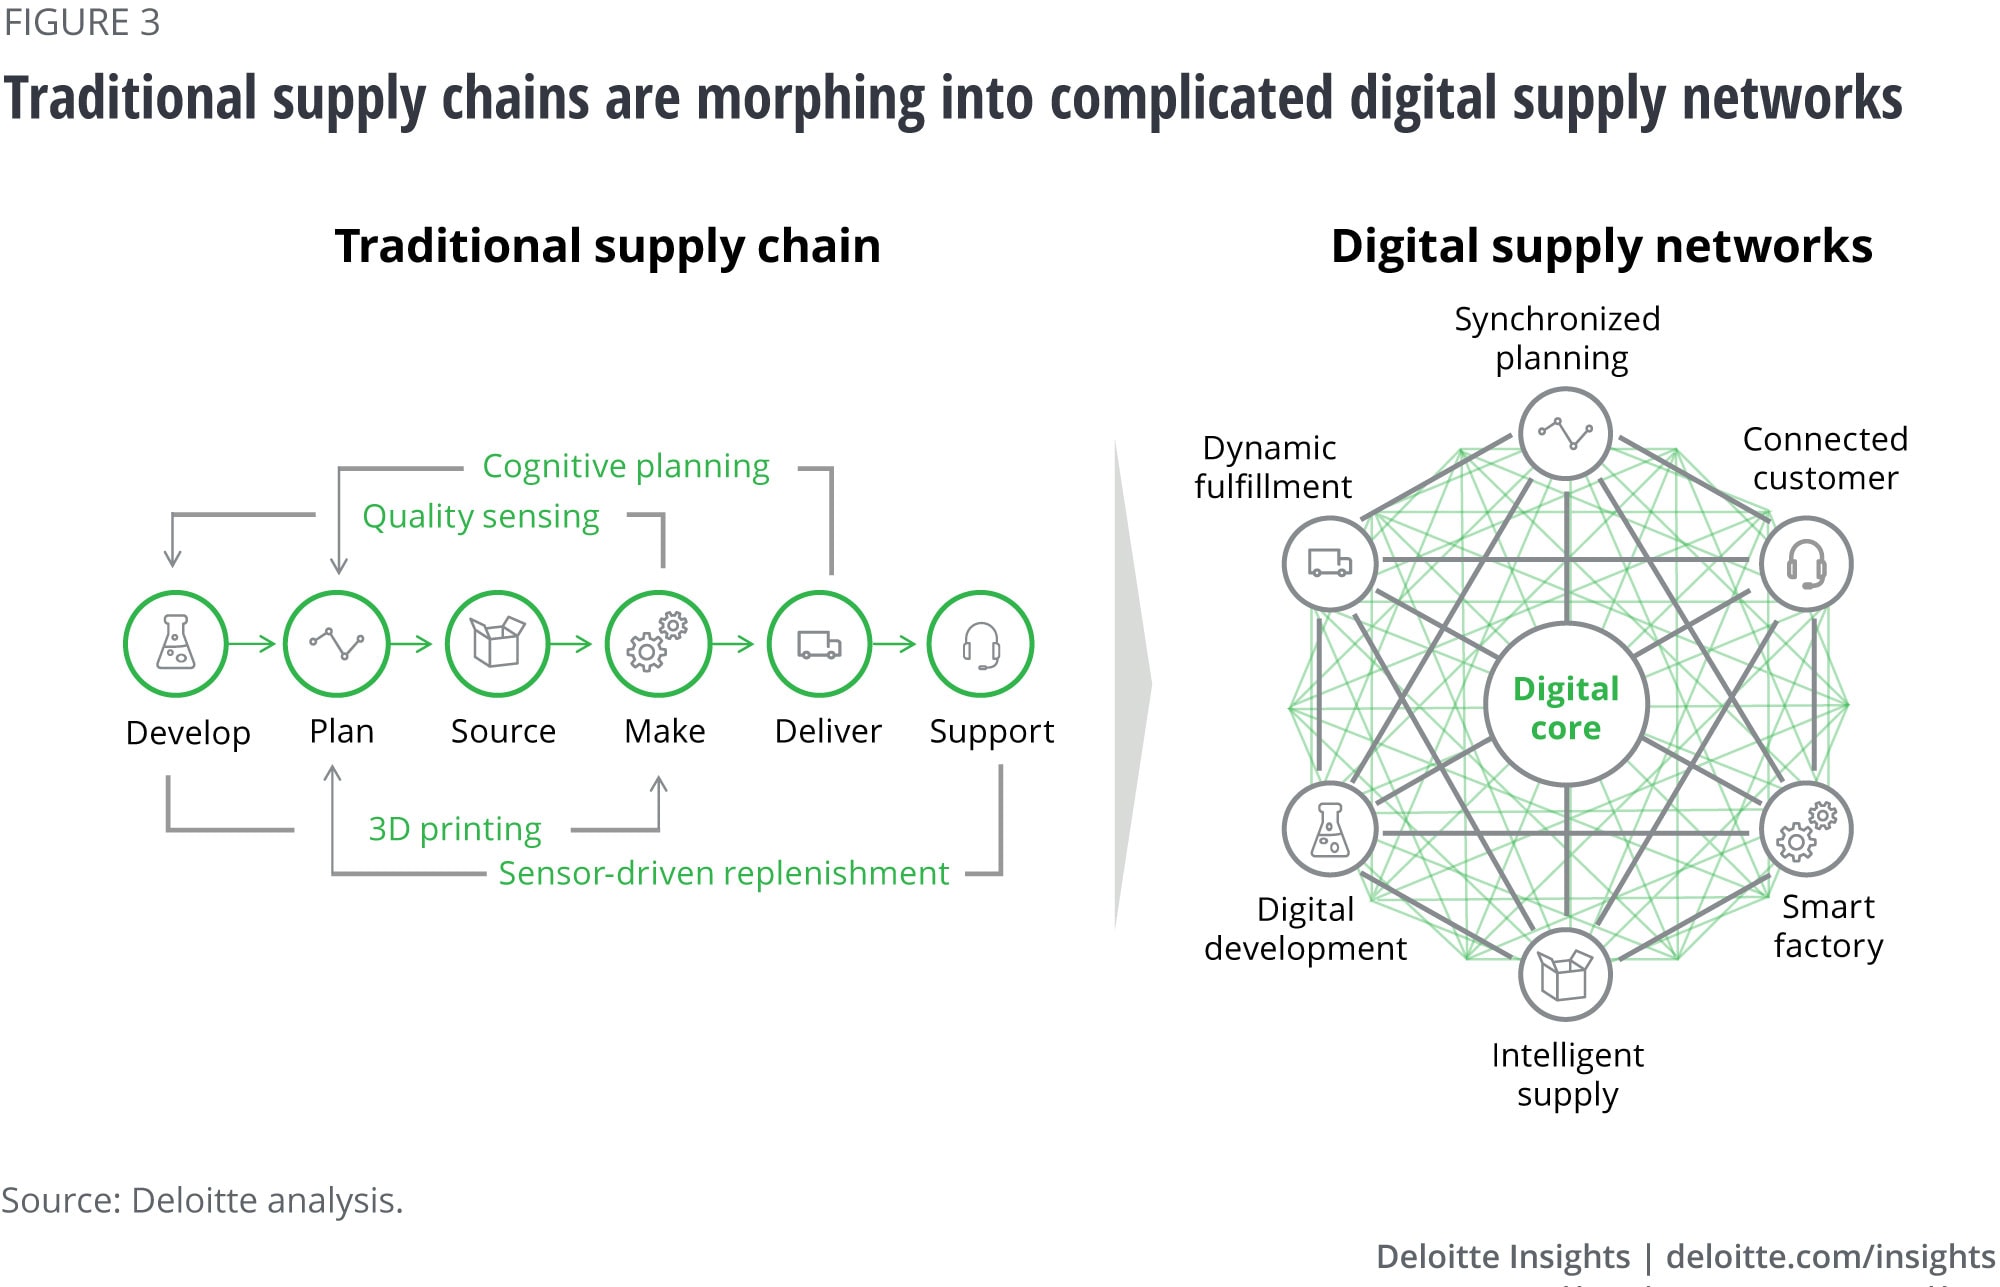 Traditional supply chains are morphing into complicated digital supply networks